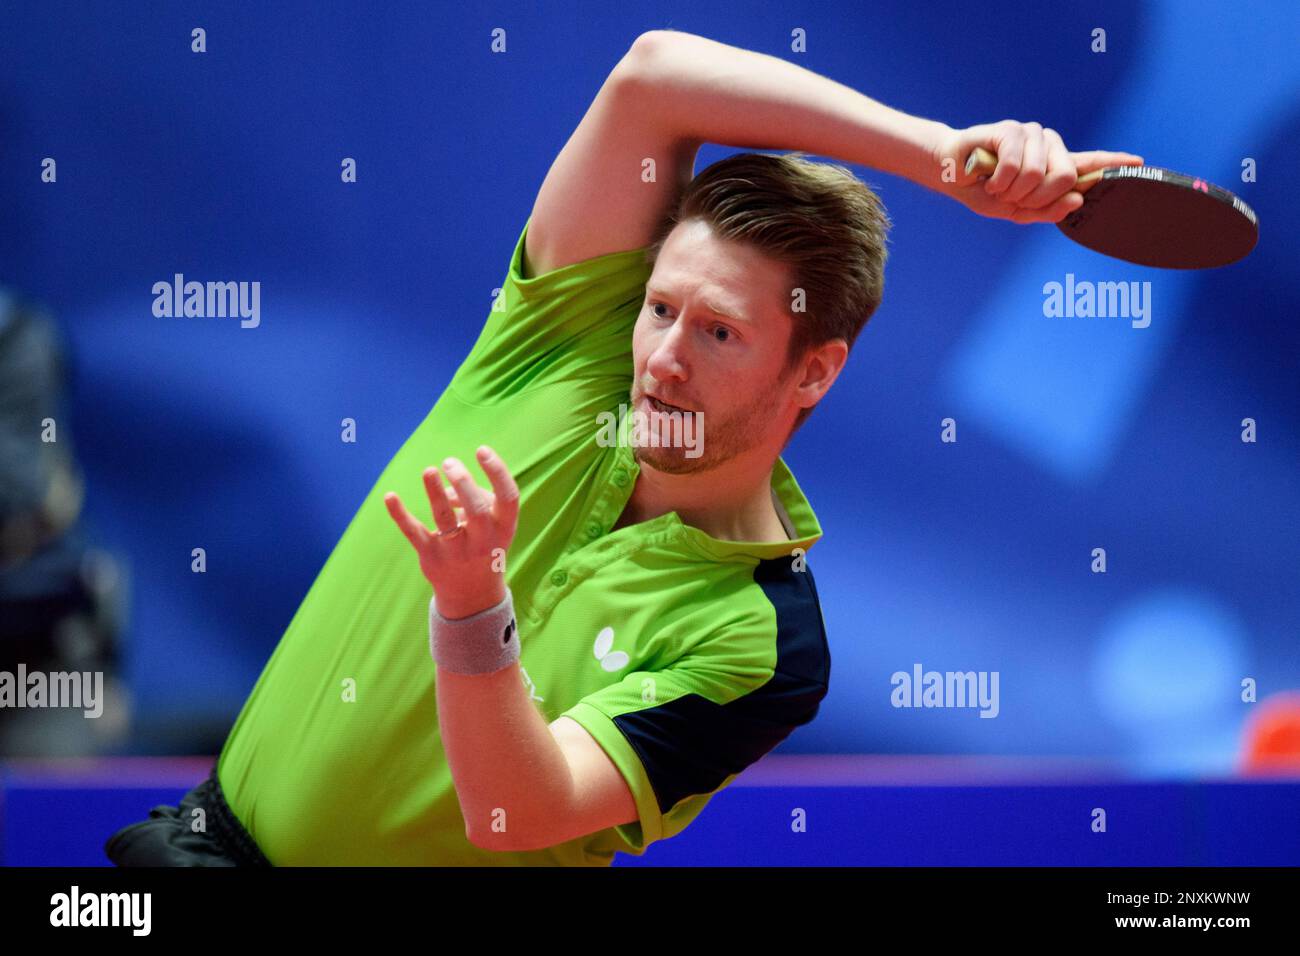 Germany's Ruwen Filus returns a ball to Sweden's Mattias Karlsson during  the Men's Singles round of 16 match at the ITTF Europe Top 16 Cup table  tennis tournament in Montreux, Switzerland, Saturday,